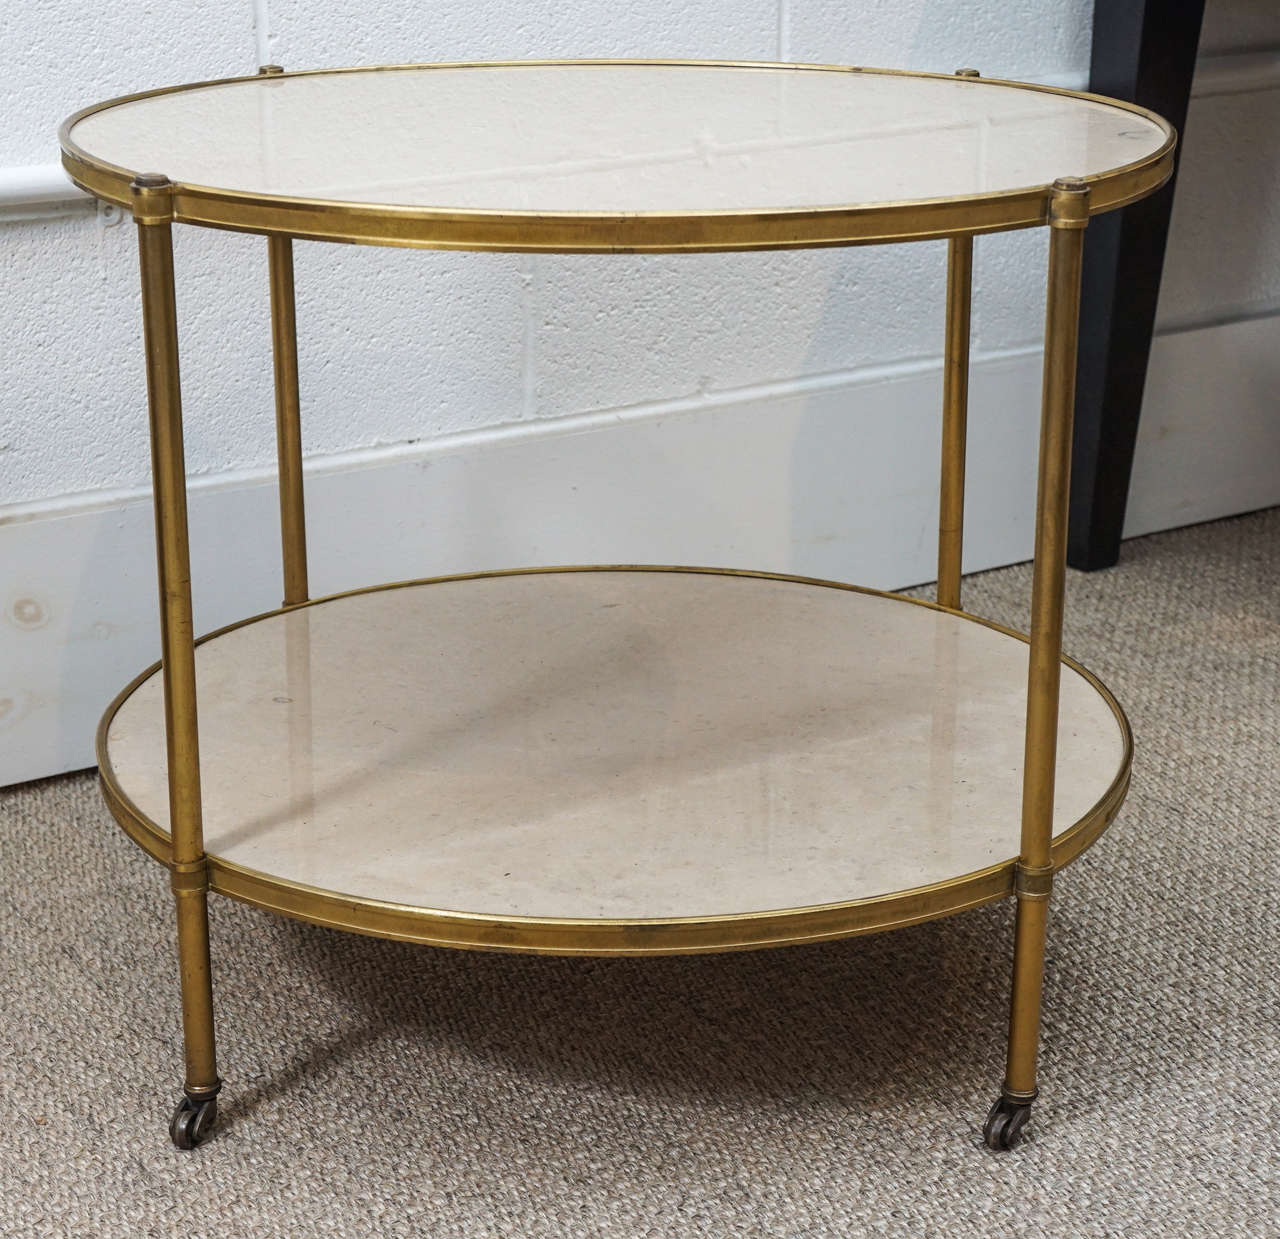 Here is a beautiful two-tiered marble table with solid brass surround and castered feet.